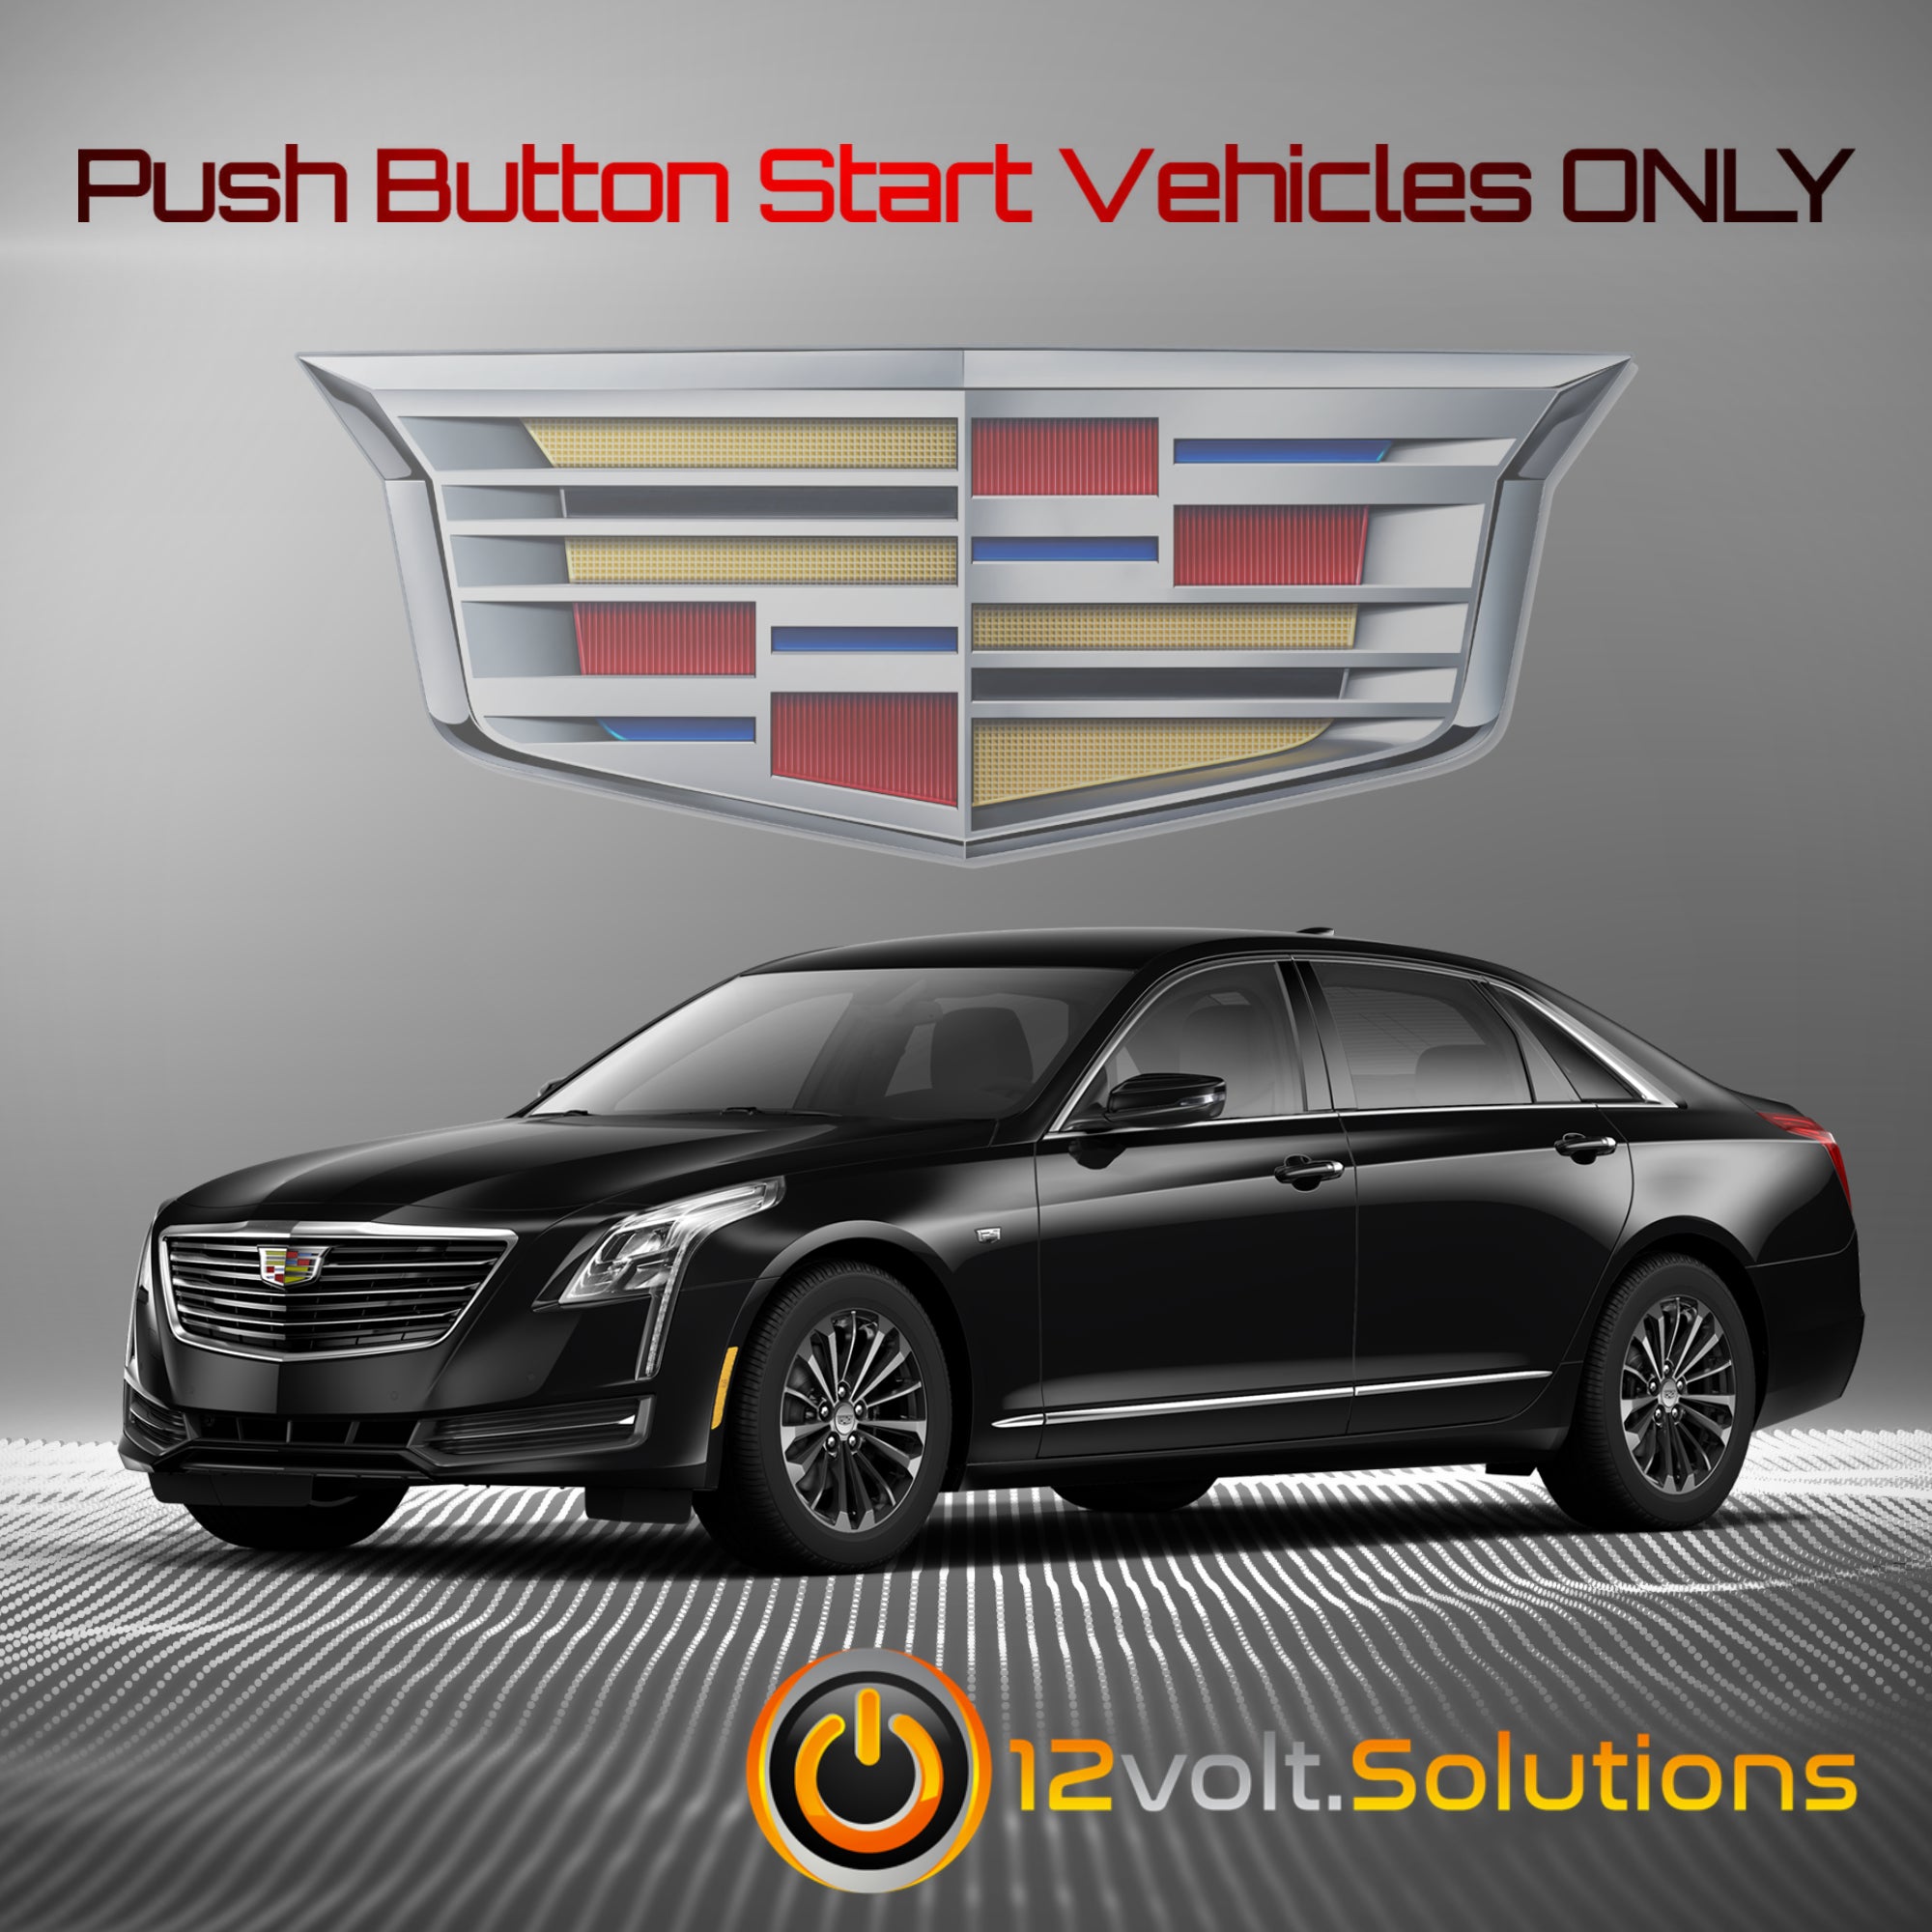 2016-2020 Cadillac CT6 Plug and Play Remote Start Kit (Push Button Start)-12Volt.Solutions